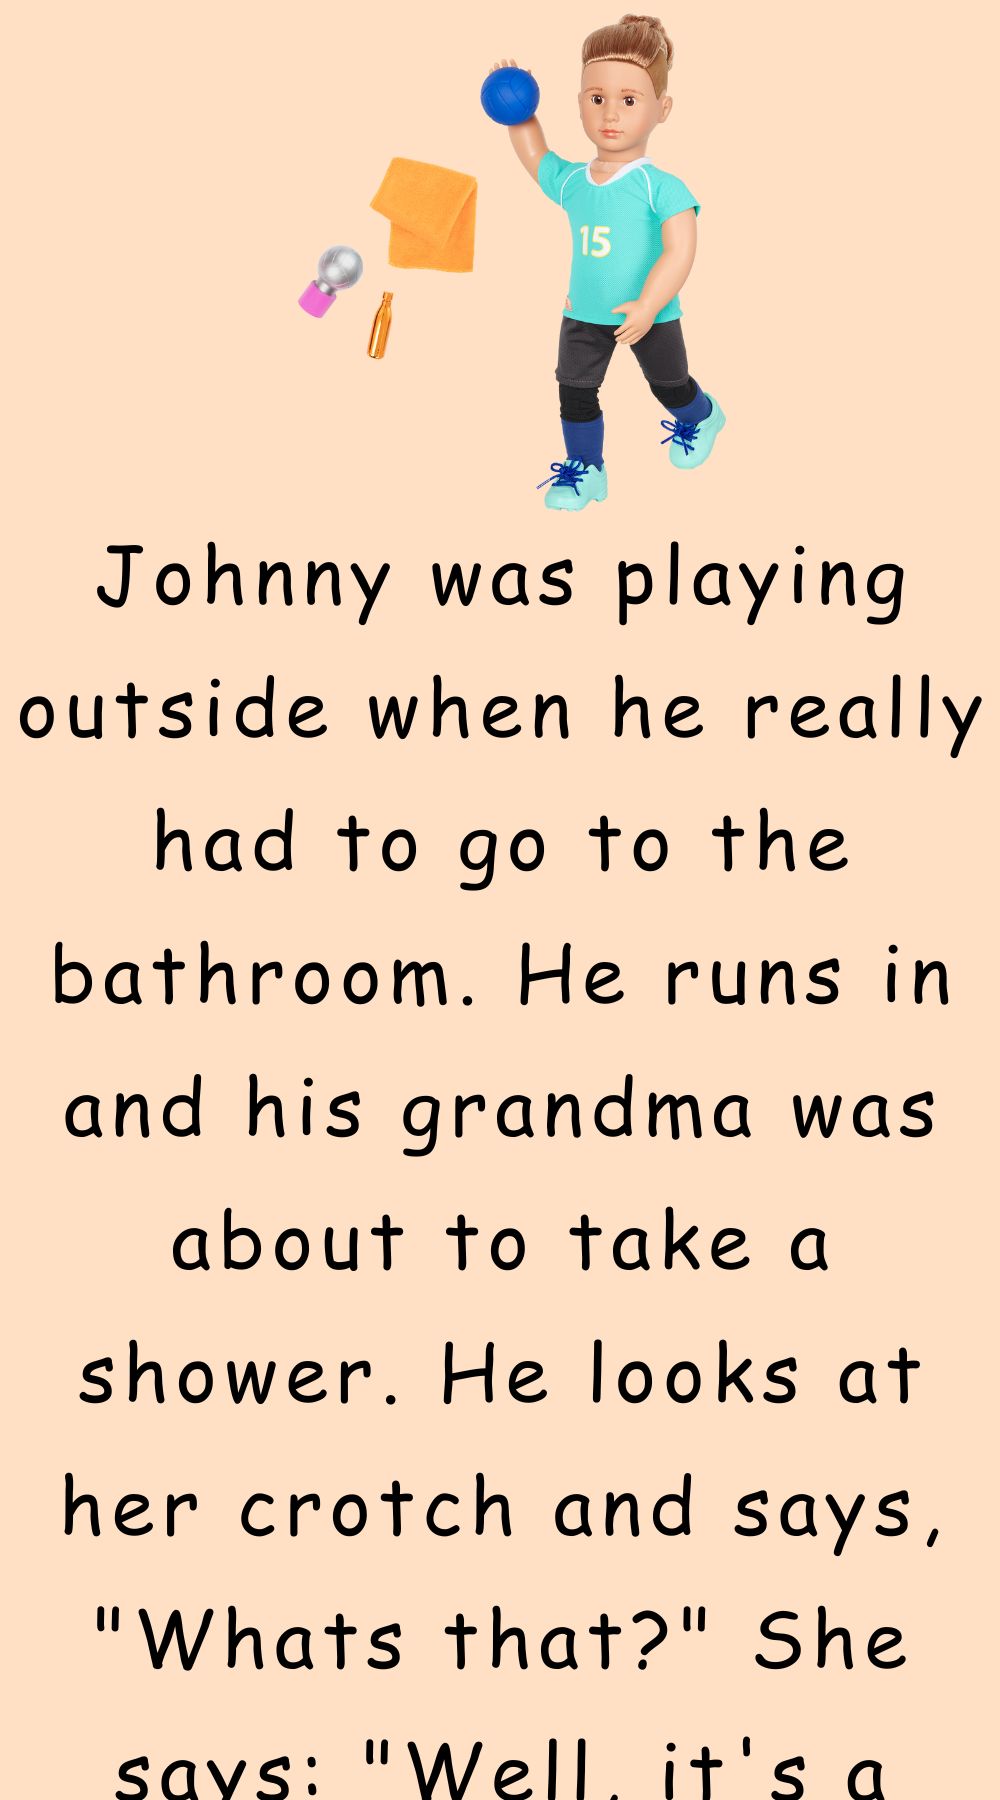 Johnny was playing outside when he 